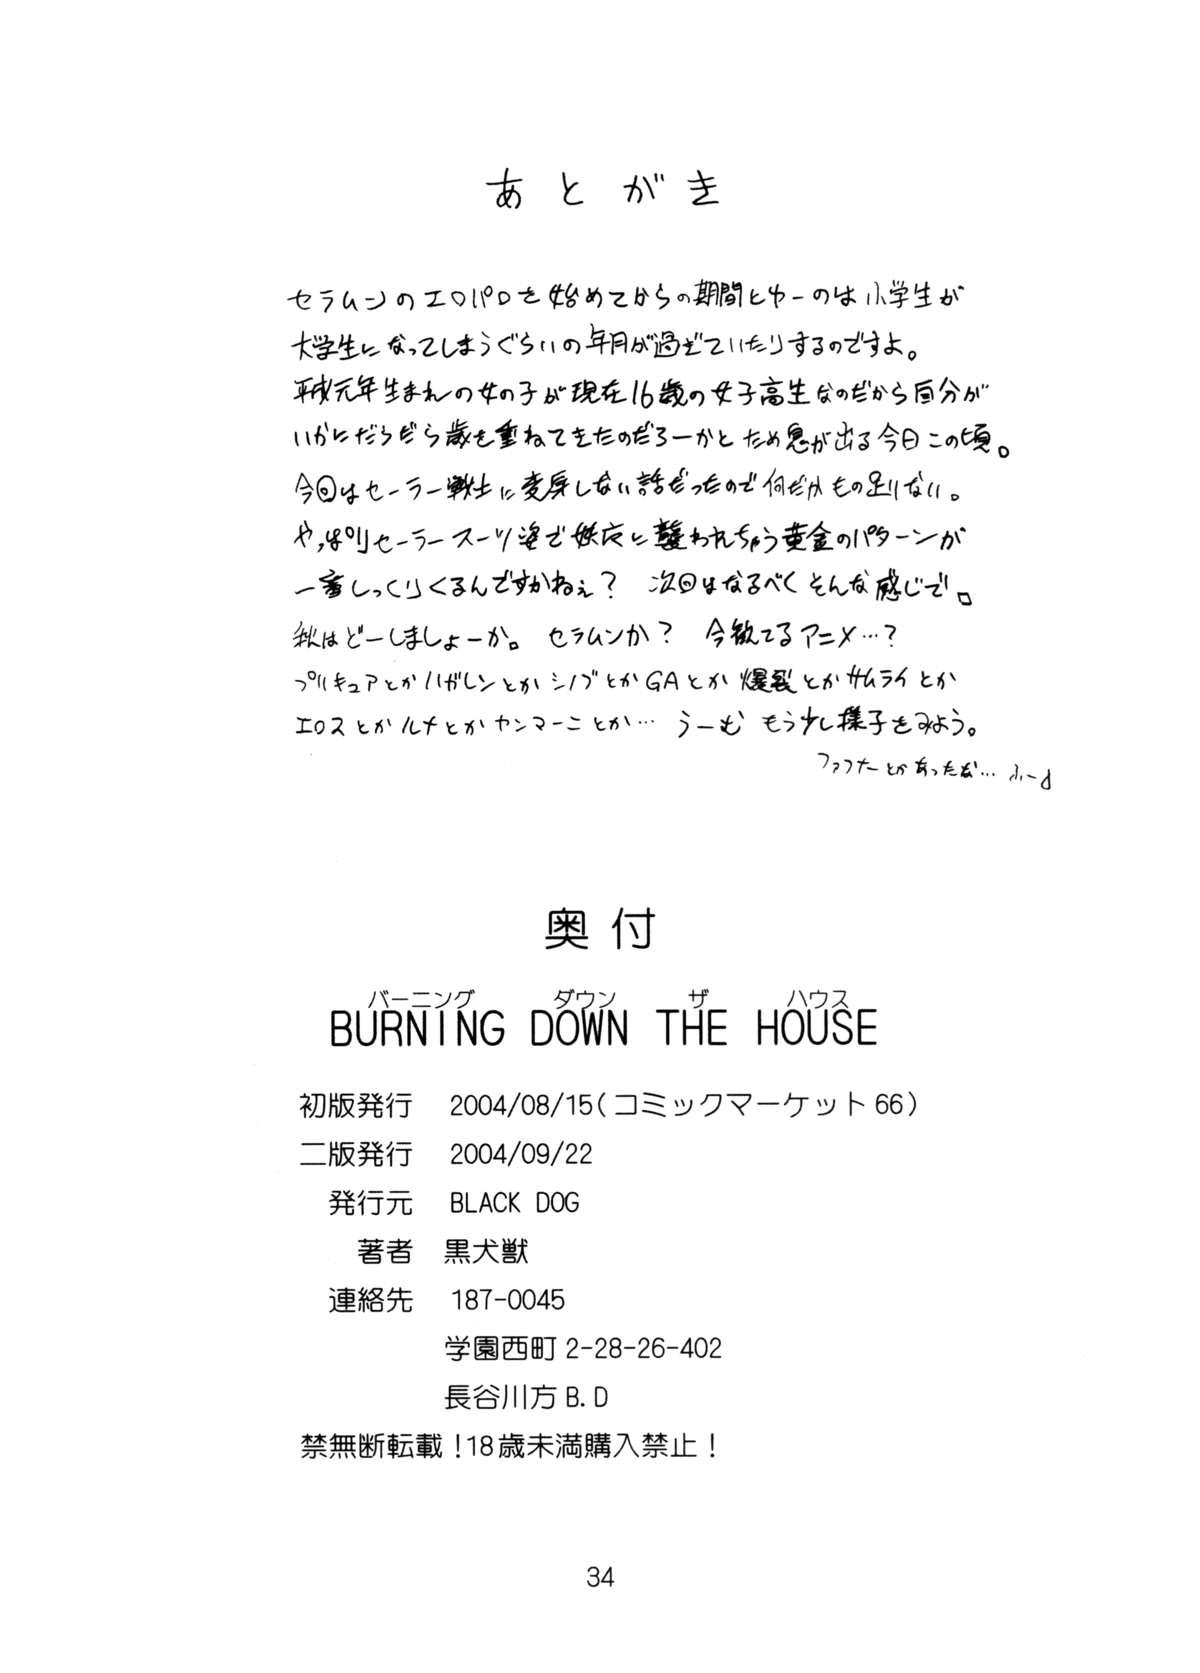 Burning Down the House 32